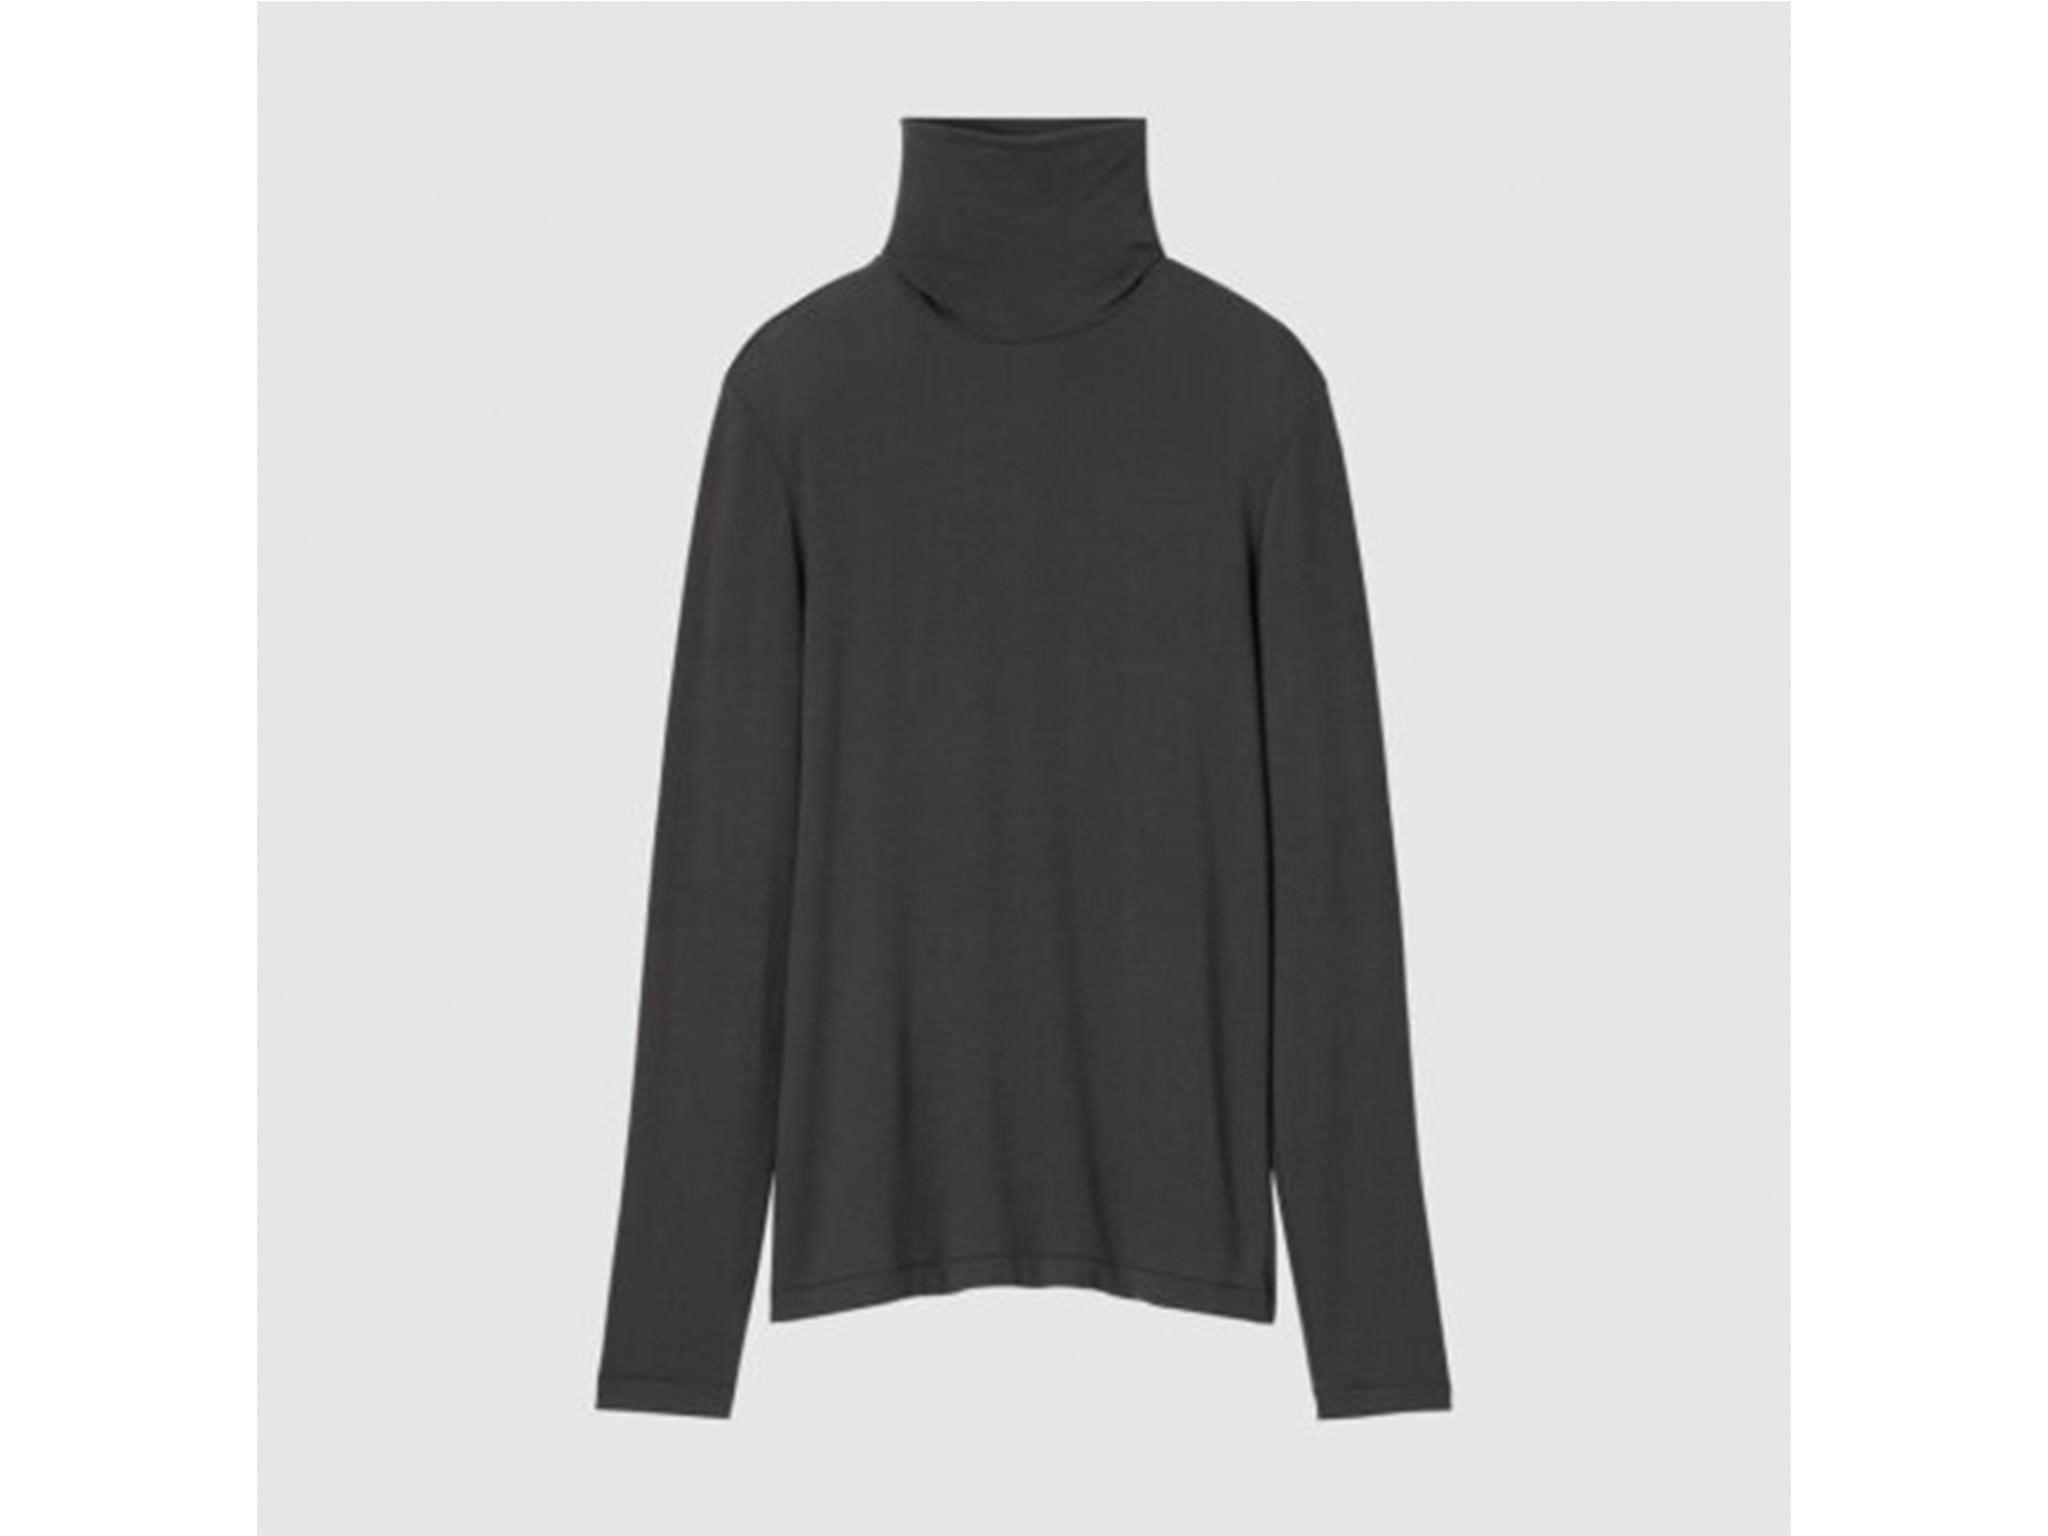 Uniqlo HEATTECH review: This $30 base layer is worth every penny